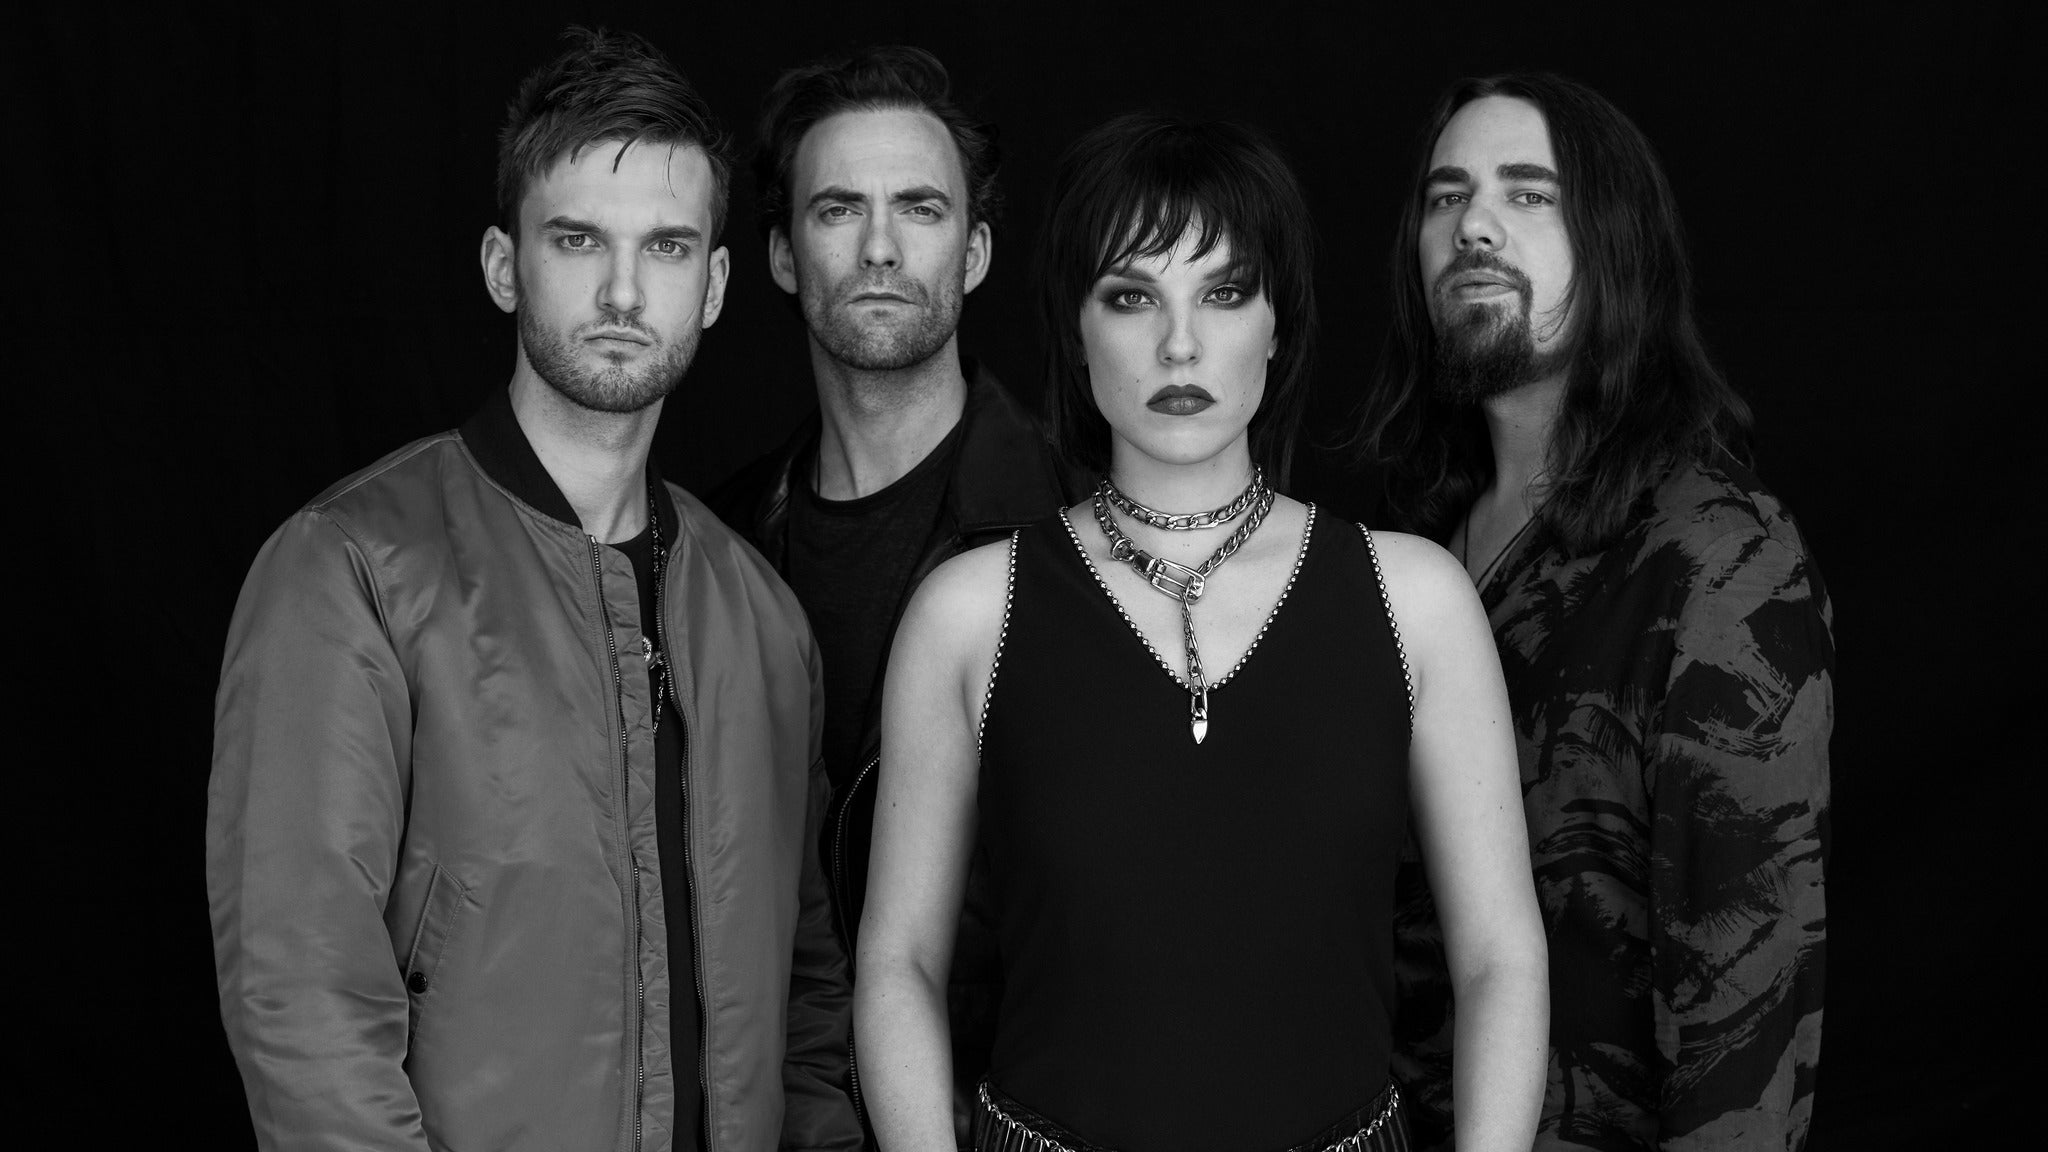 An Evening with Halestorm